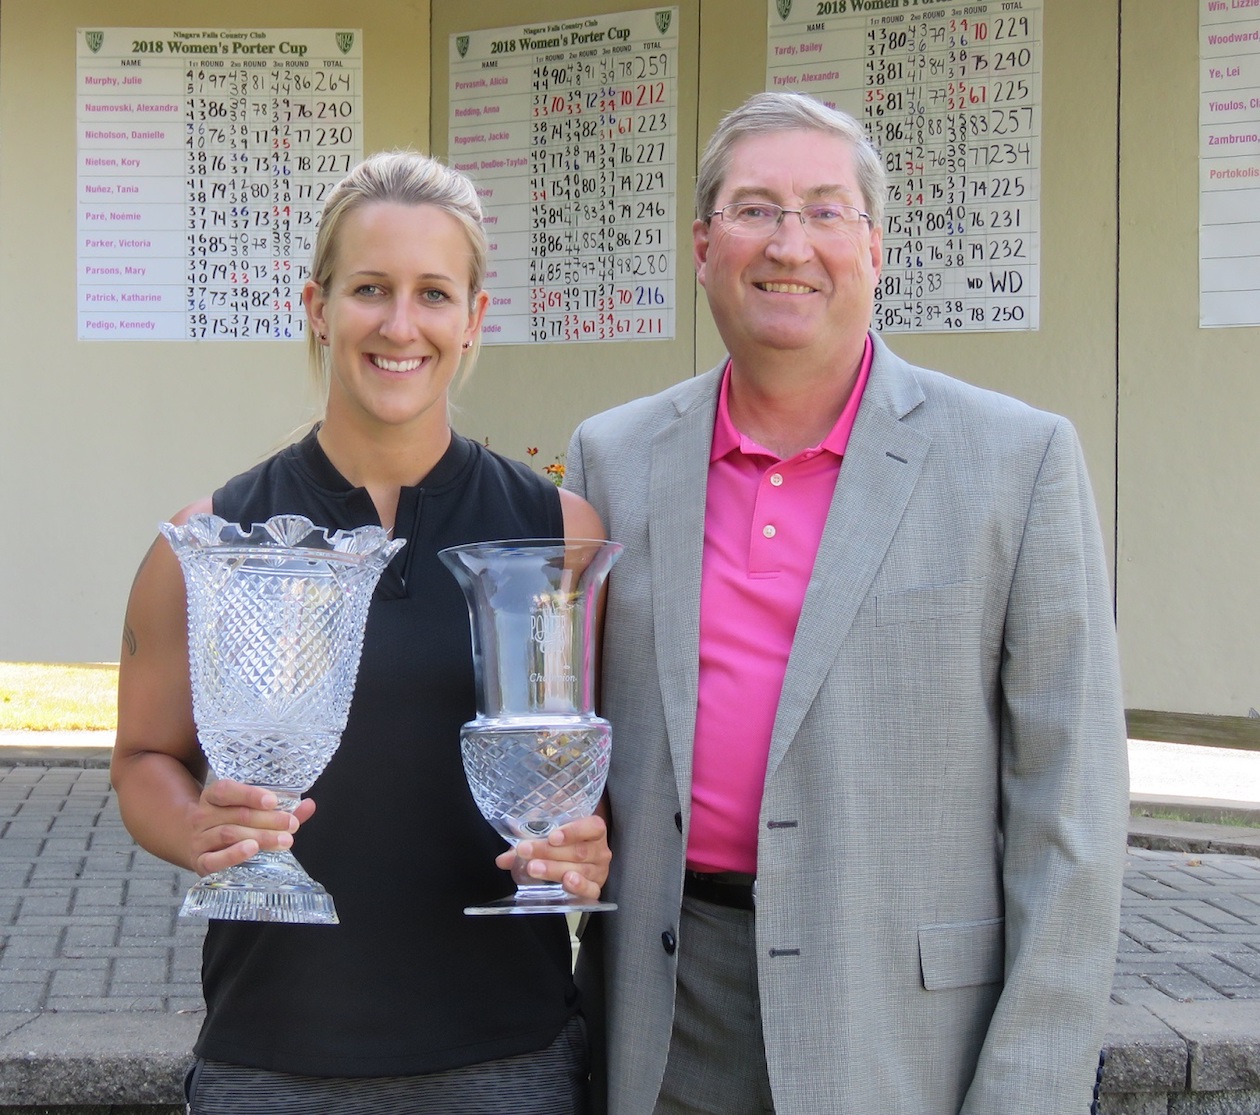 Zoe-Beth Brake holds her winning trophies alongside Tournament Director Brian Oakley. (All photos by David Yarger)